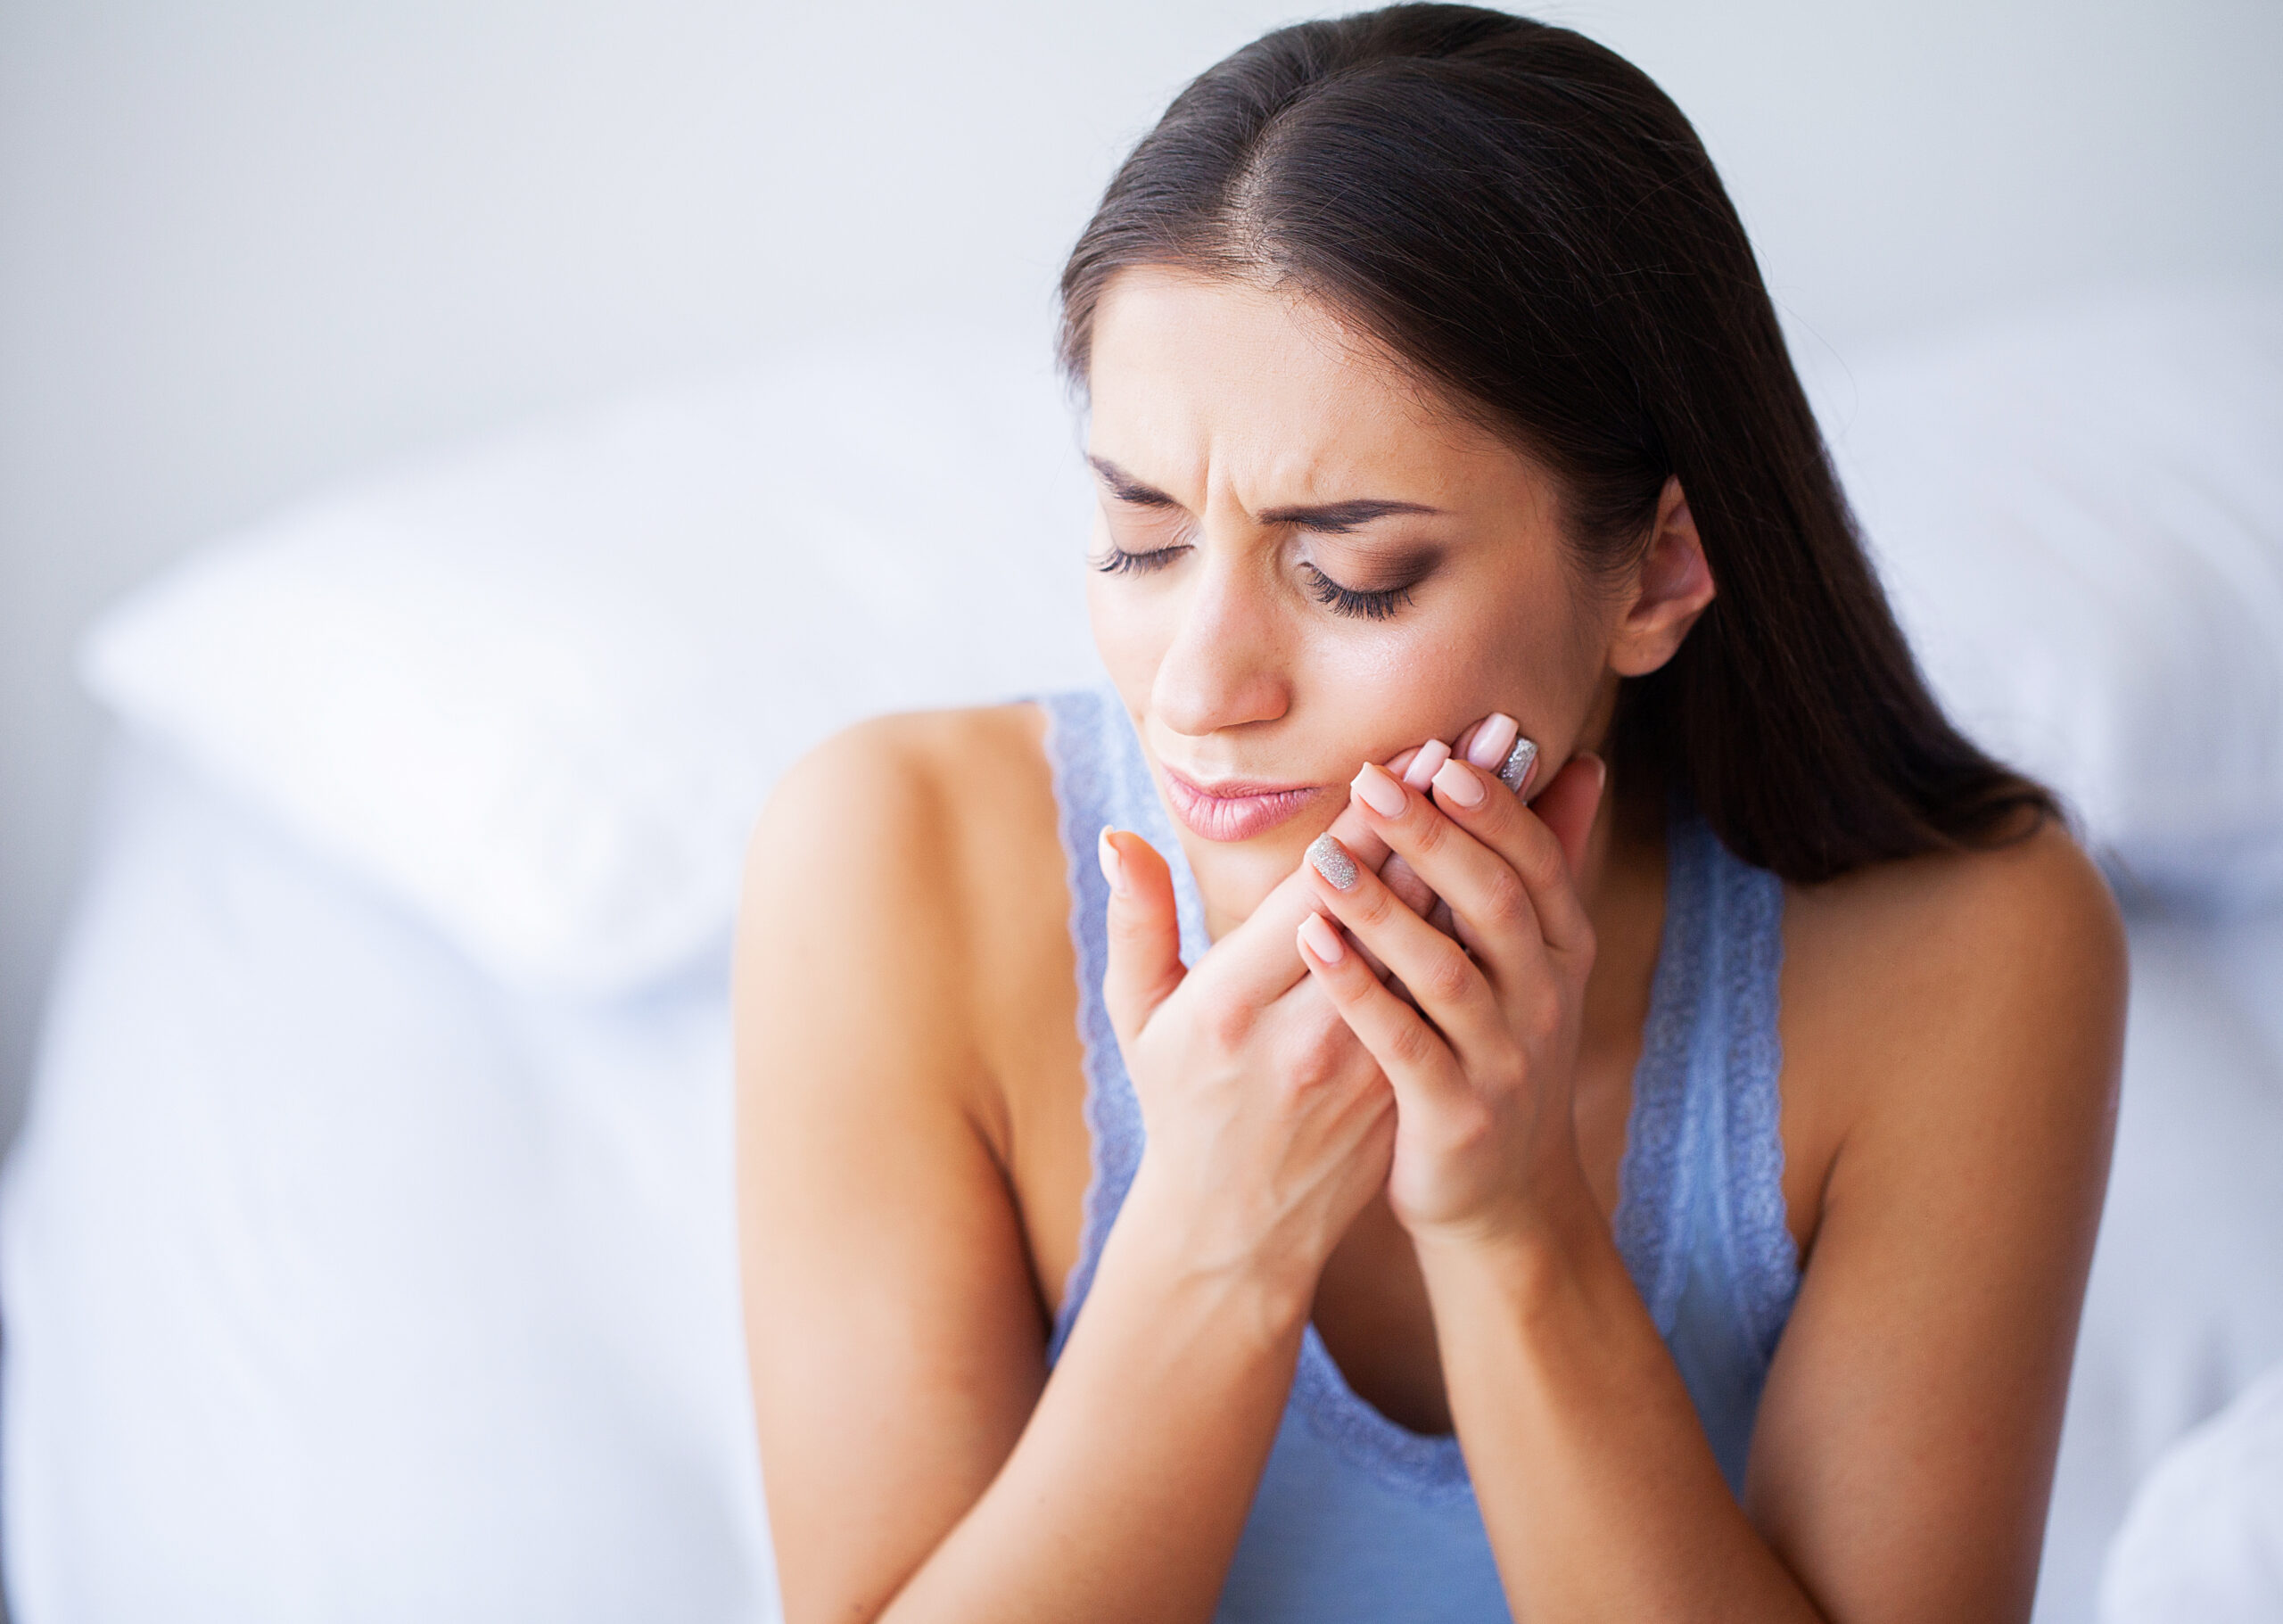 Woman Feeling Tooth Pain and Holding Chin